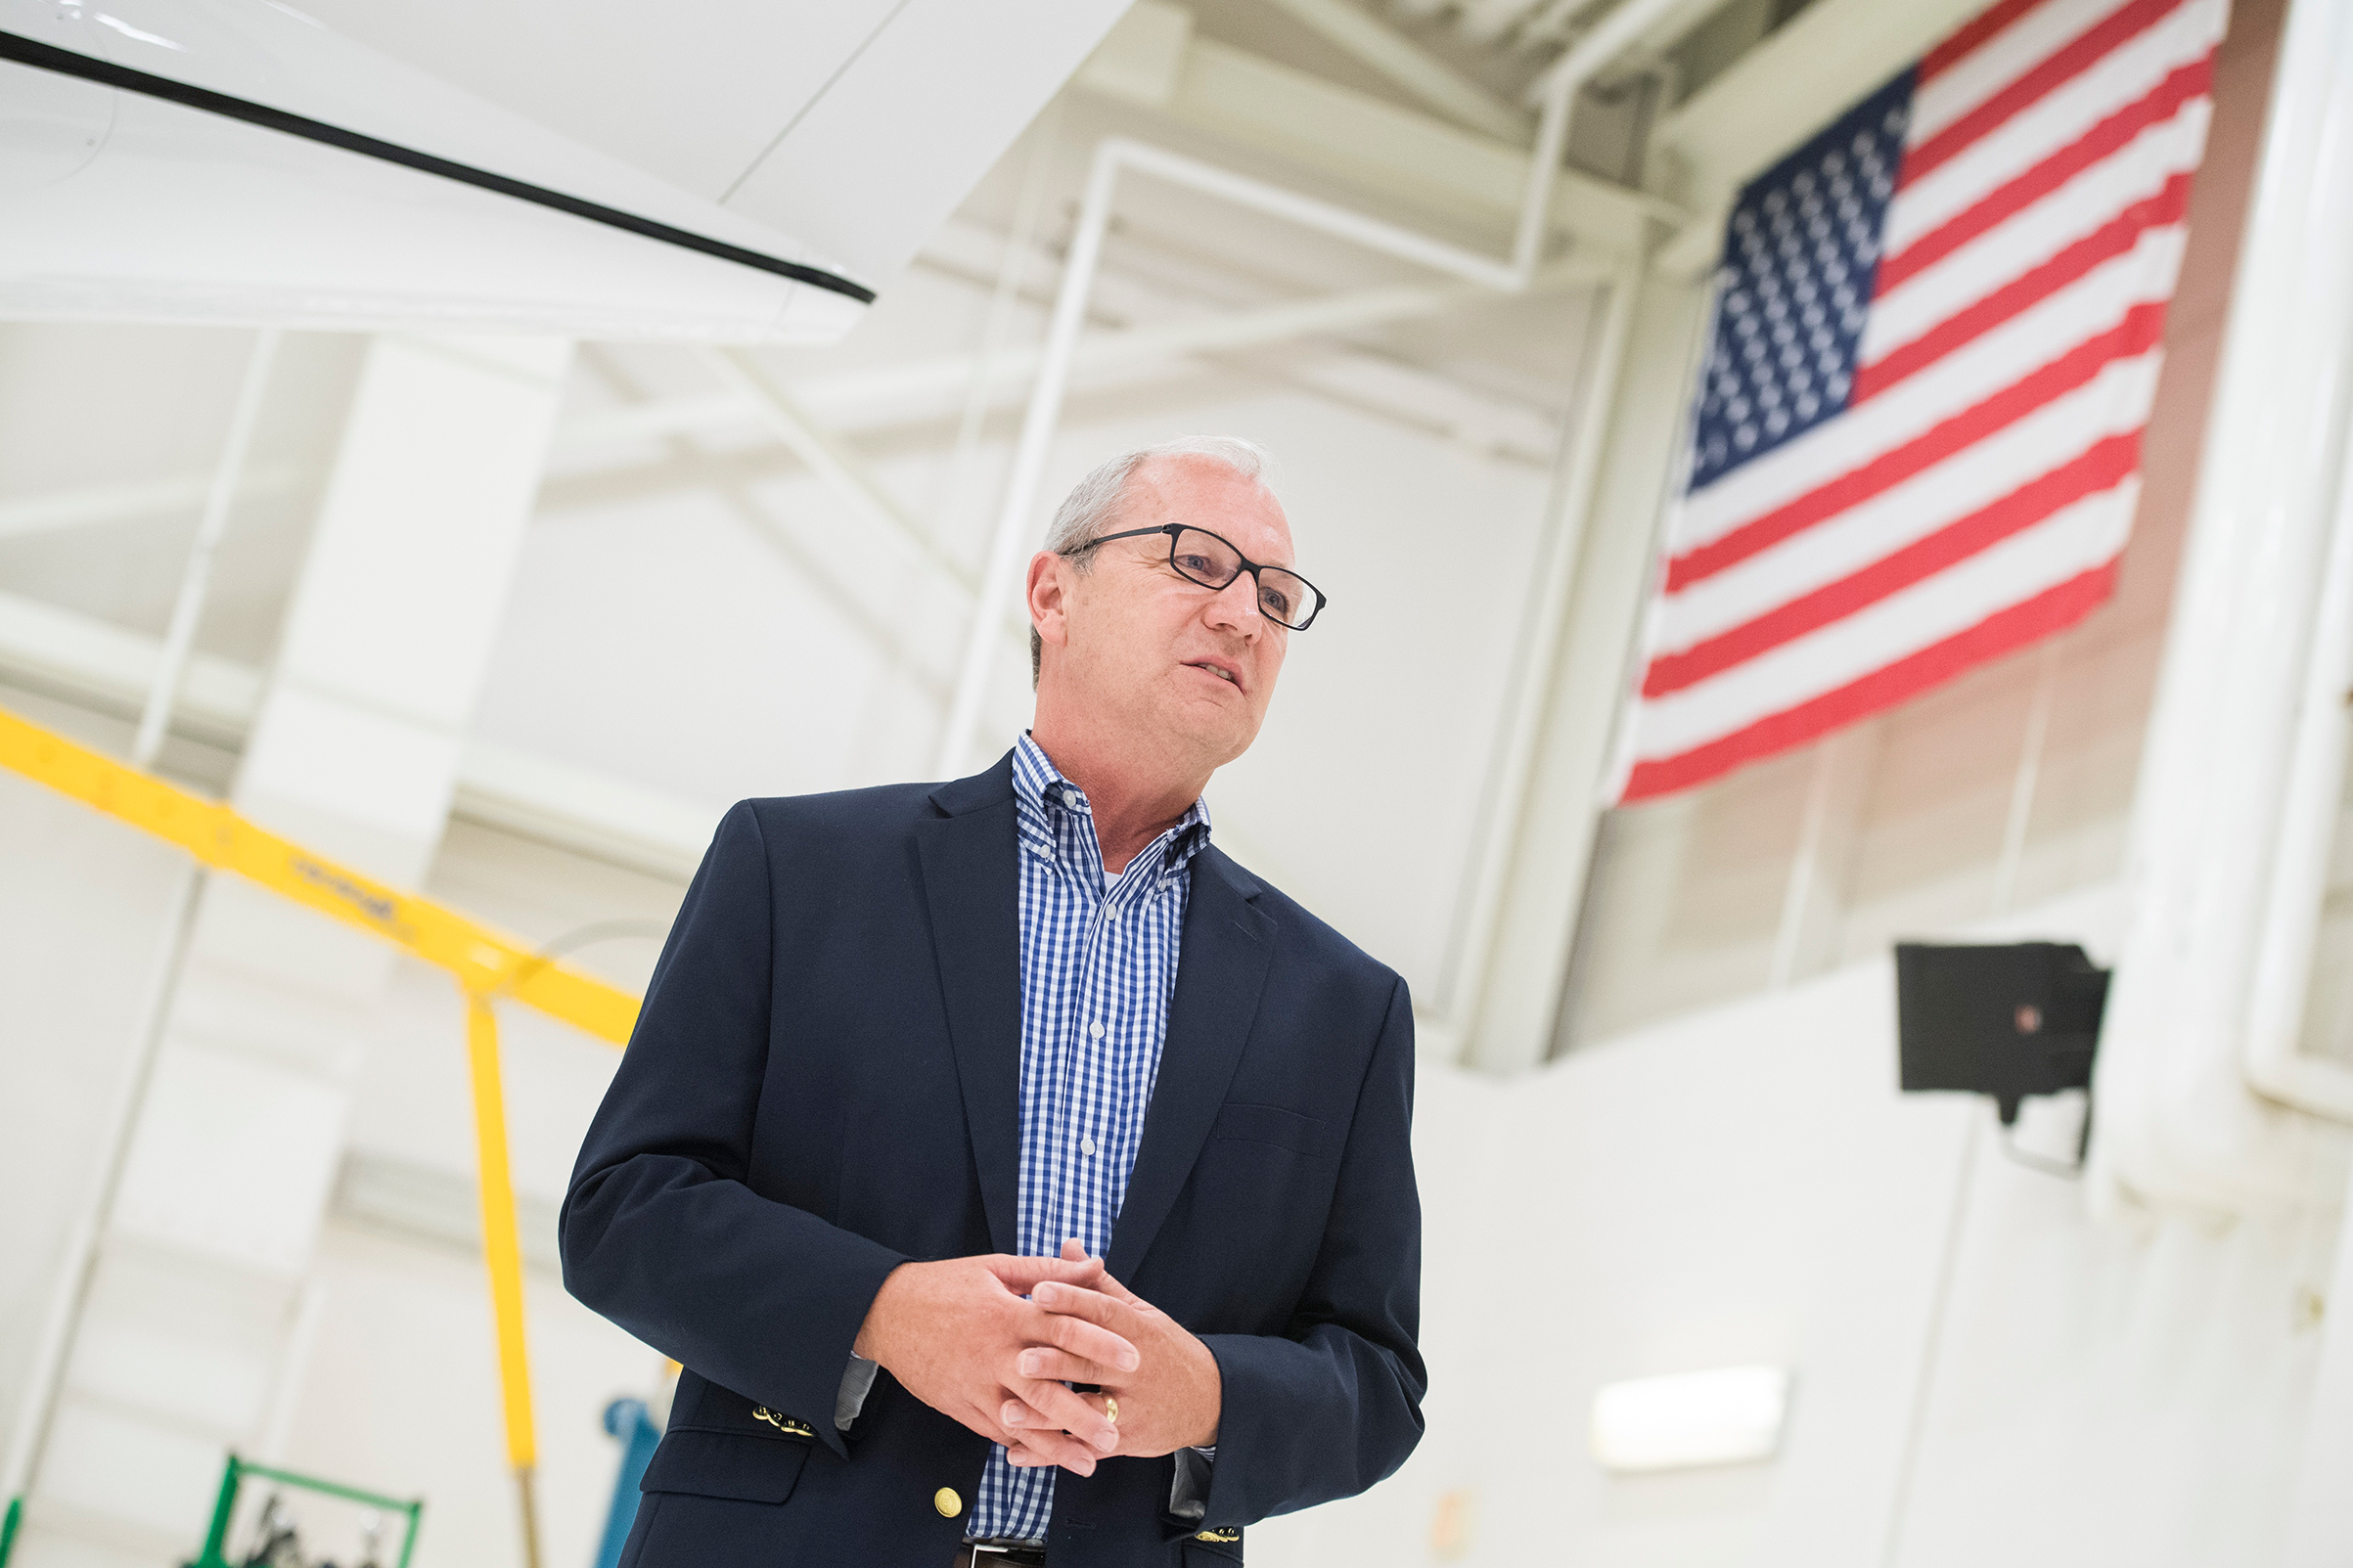 GOP Senate candidates like North Dakota’s Kevin Cramer are relying on Trump to help drive turnout (Tom Williams—CQ Roll Call/Getty Images)